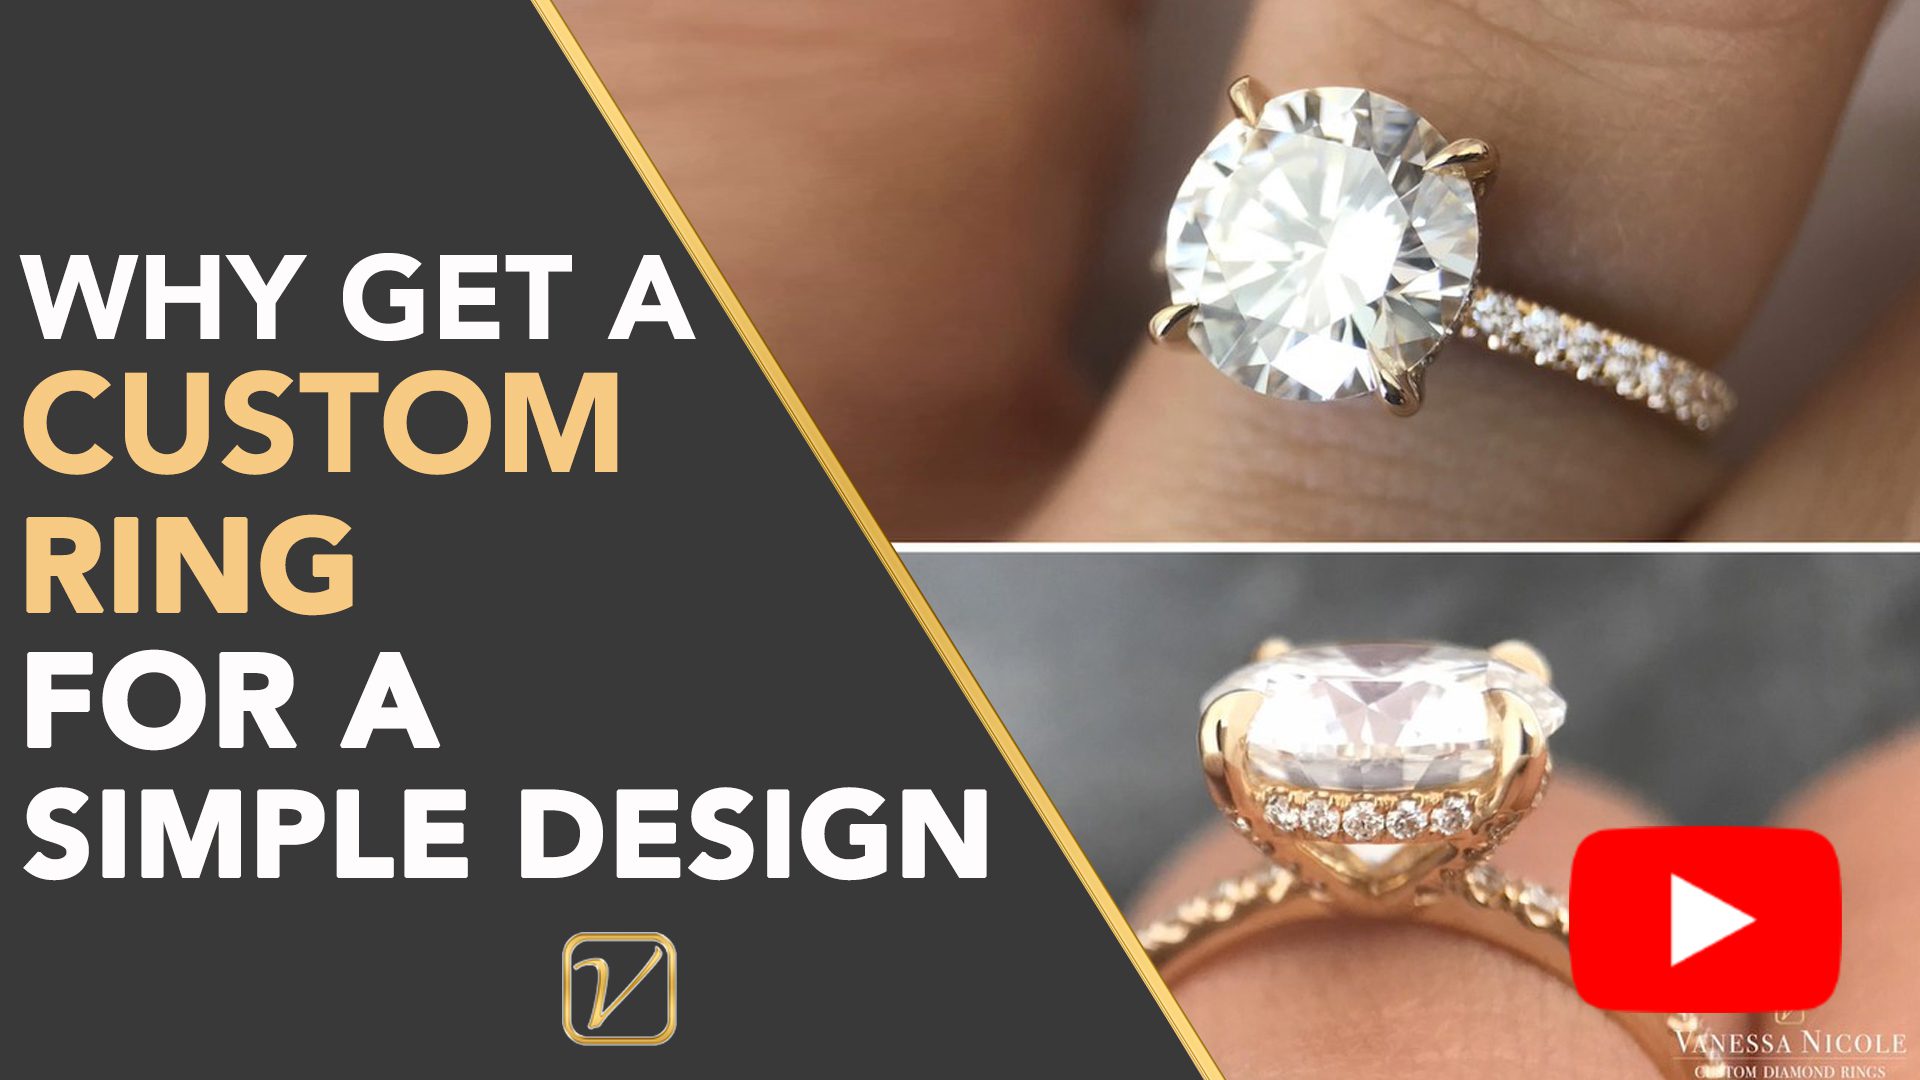 WHY GET A CUSTOM RING FOR A SIMPLE DESIGN